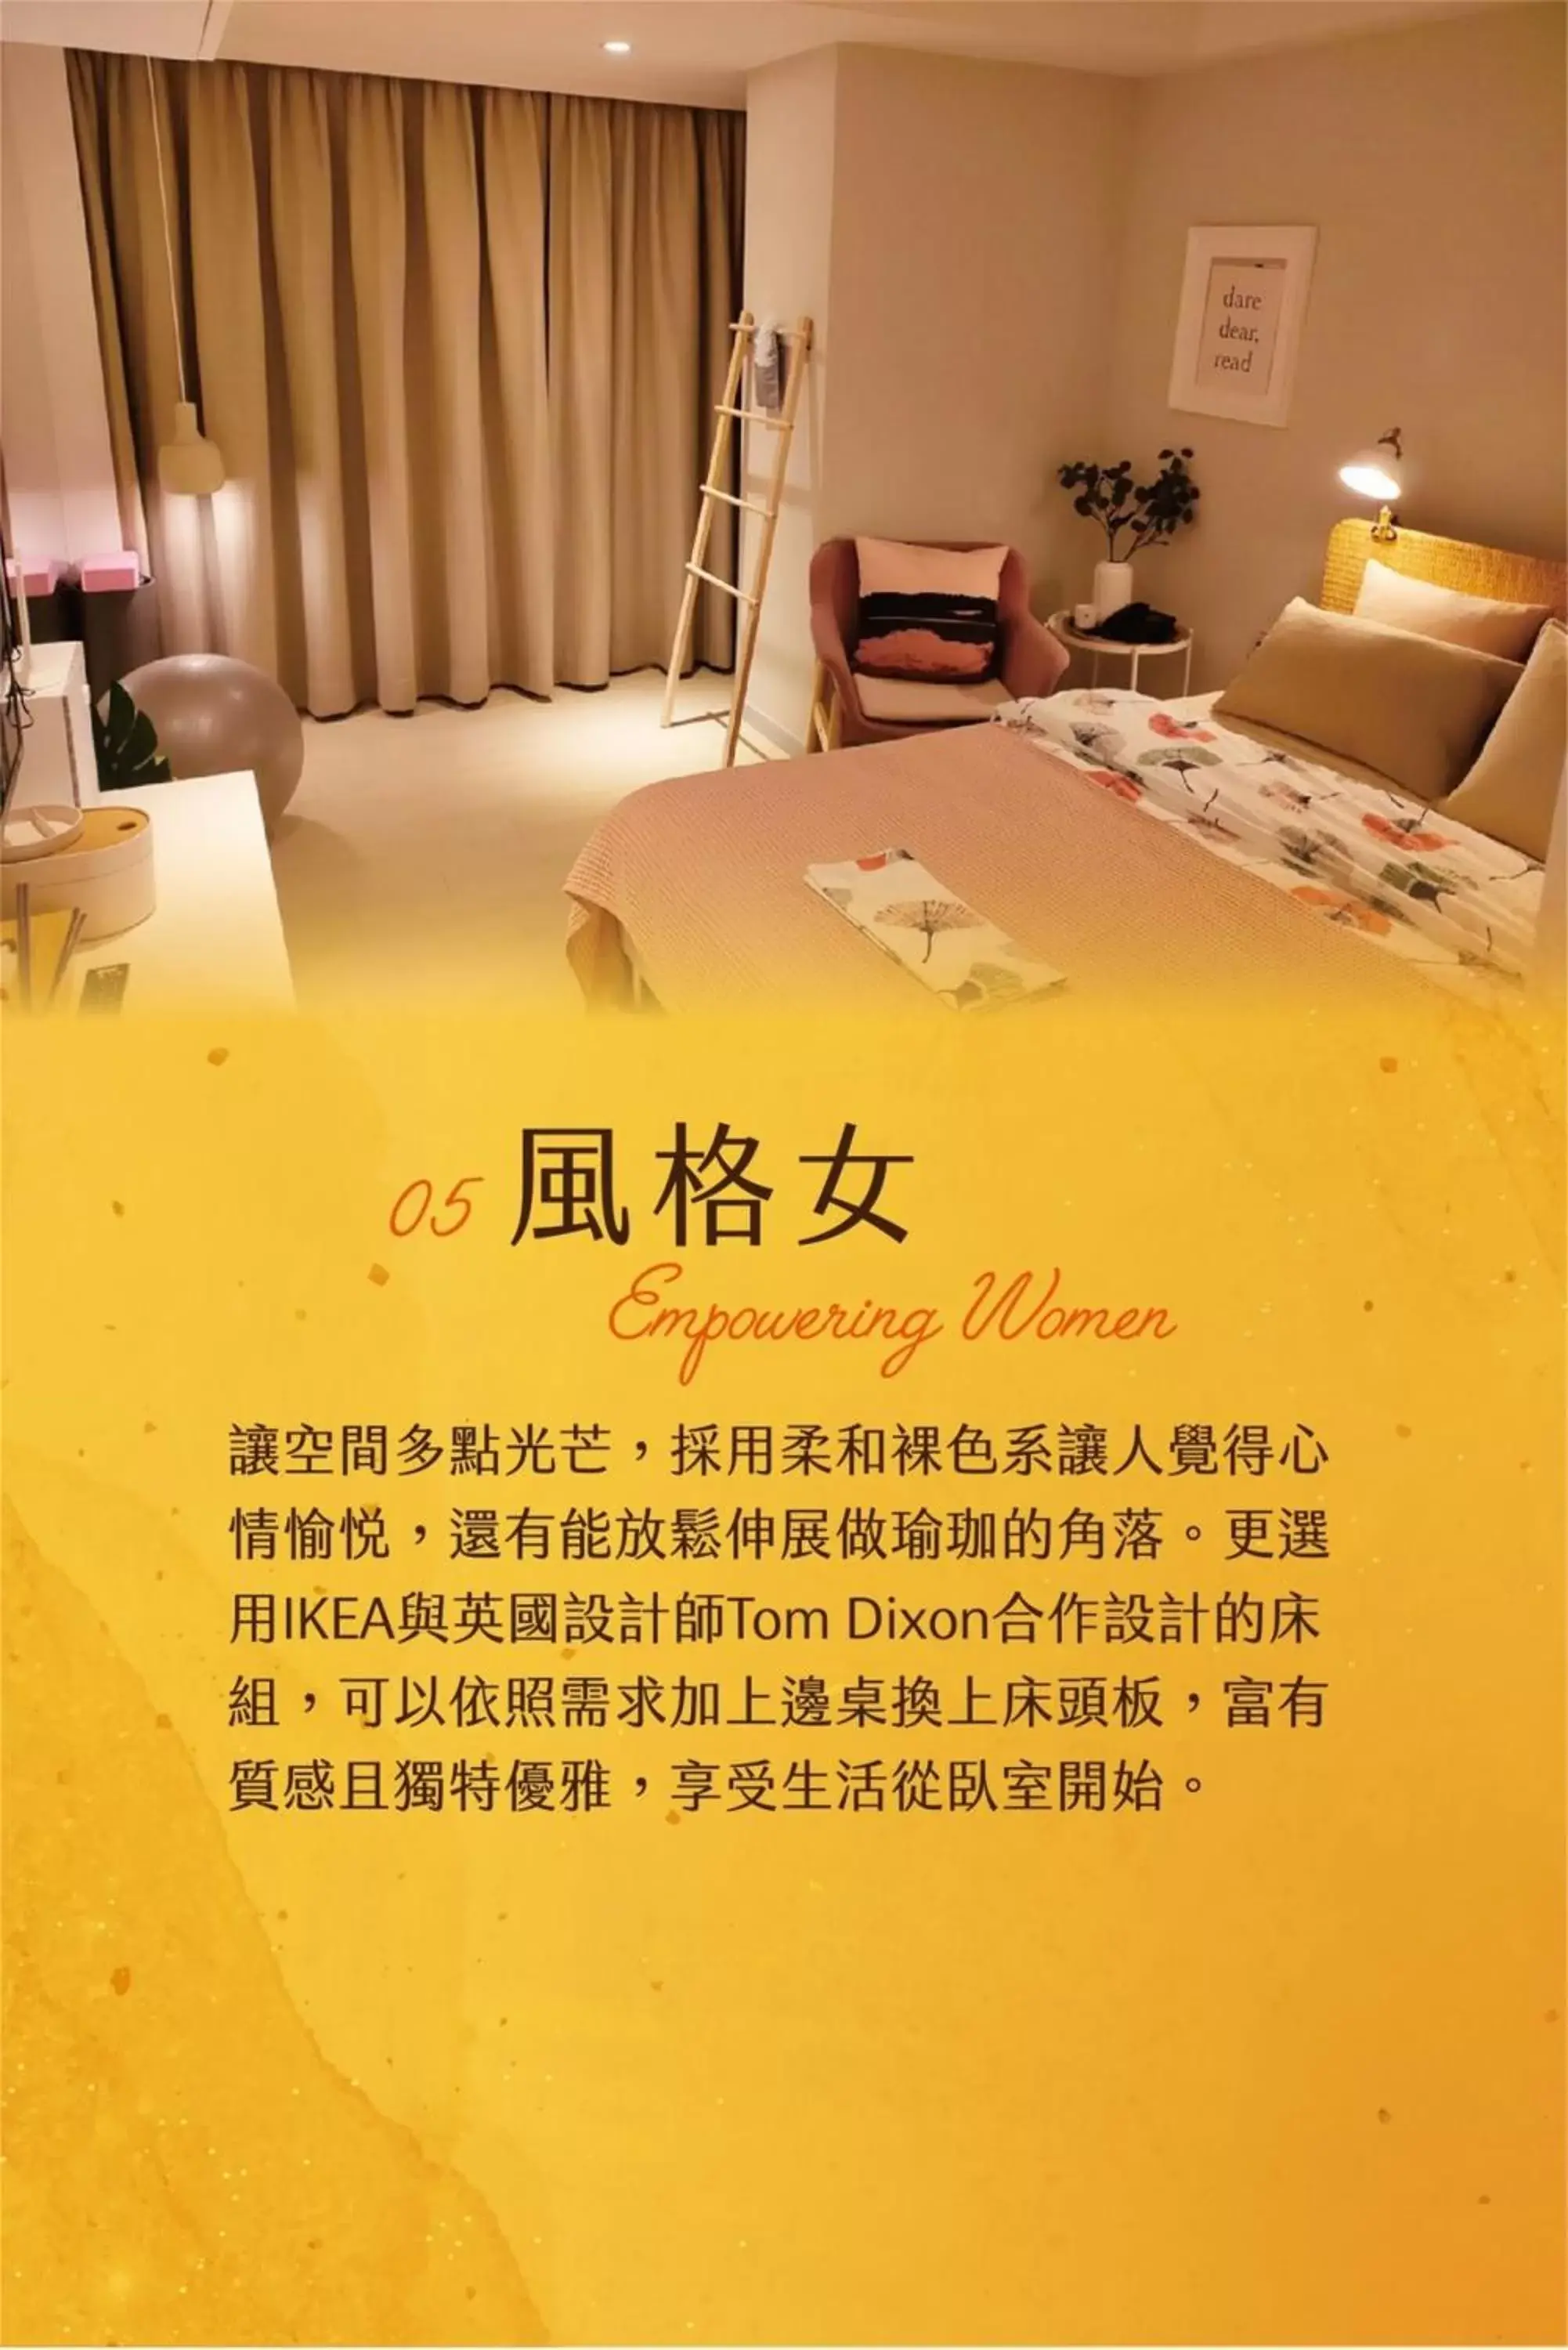 Photo of the whole room in Yomi Hotel - ShuangLian MRT